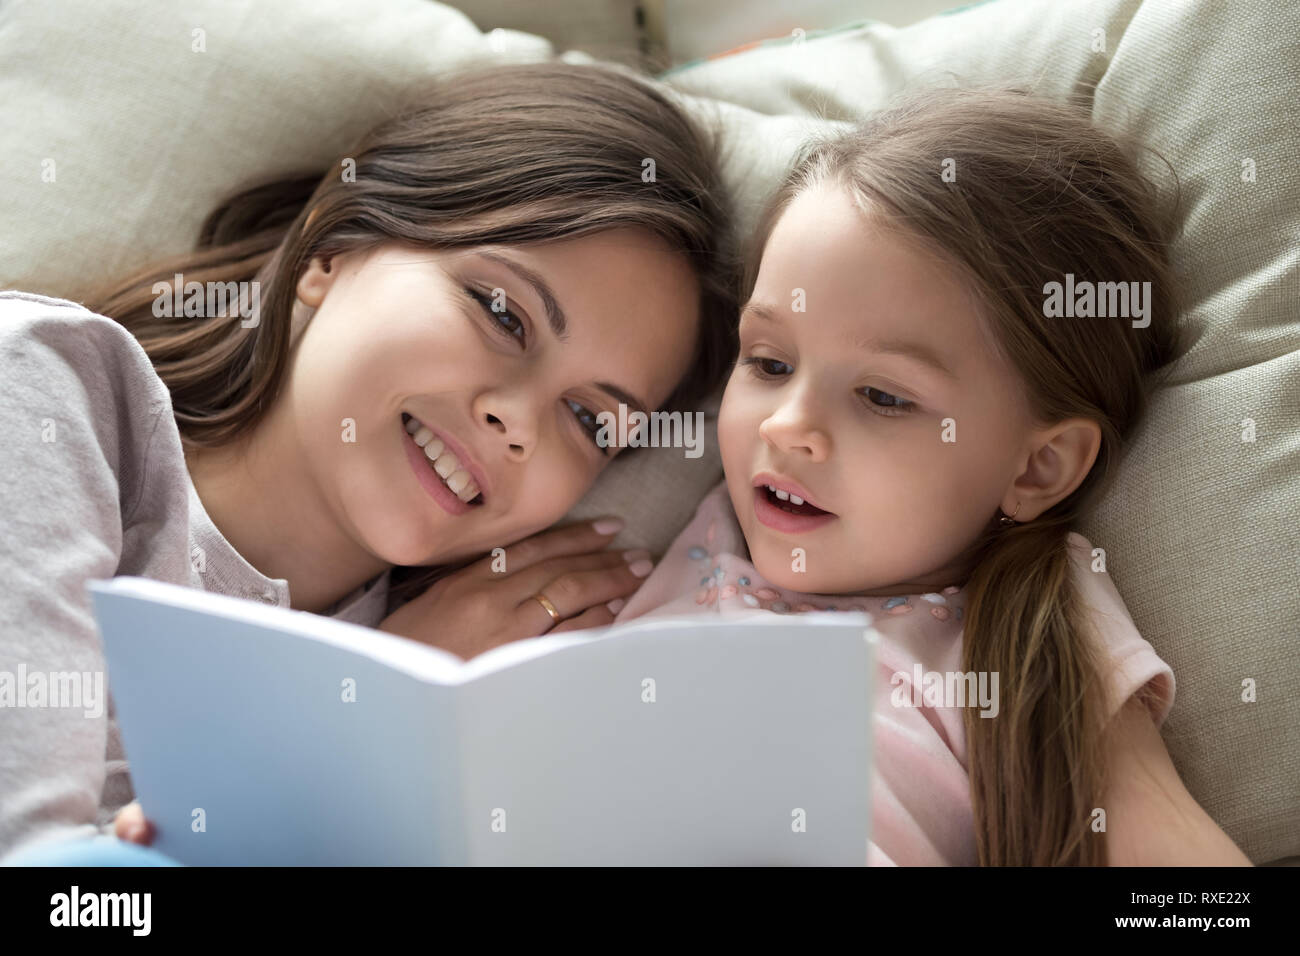 Happy mom listening child daughter learning reading book in bed Stock Photo